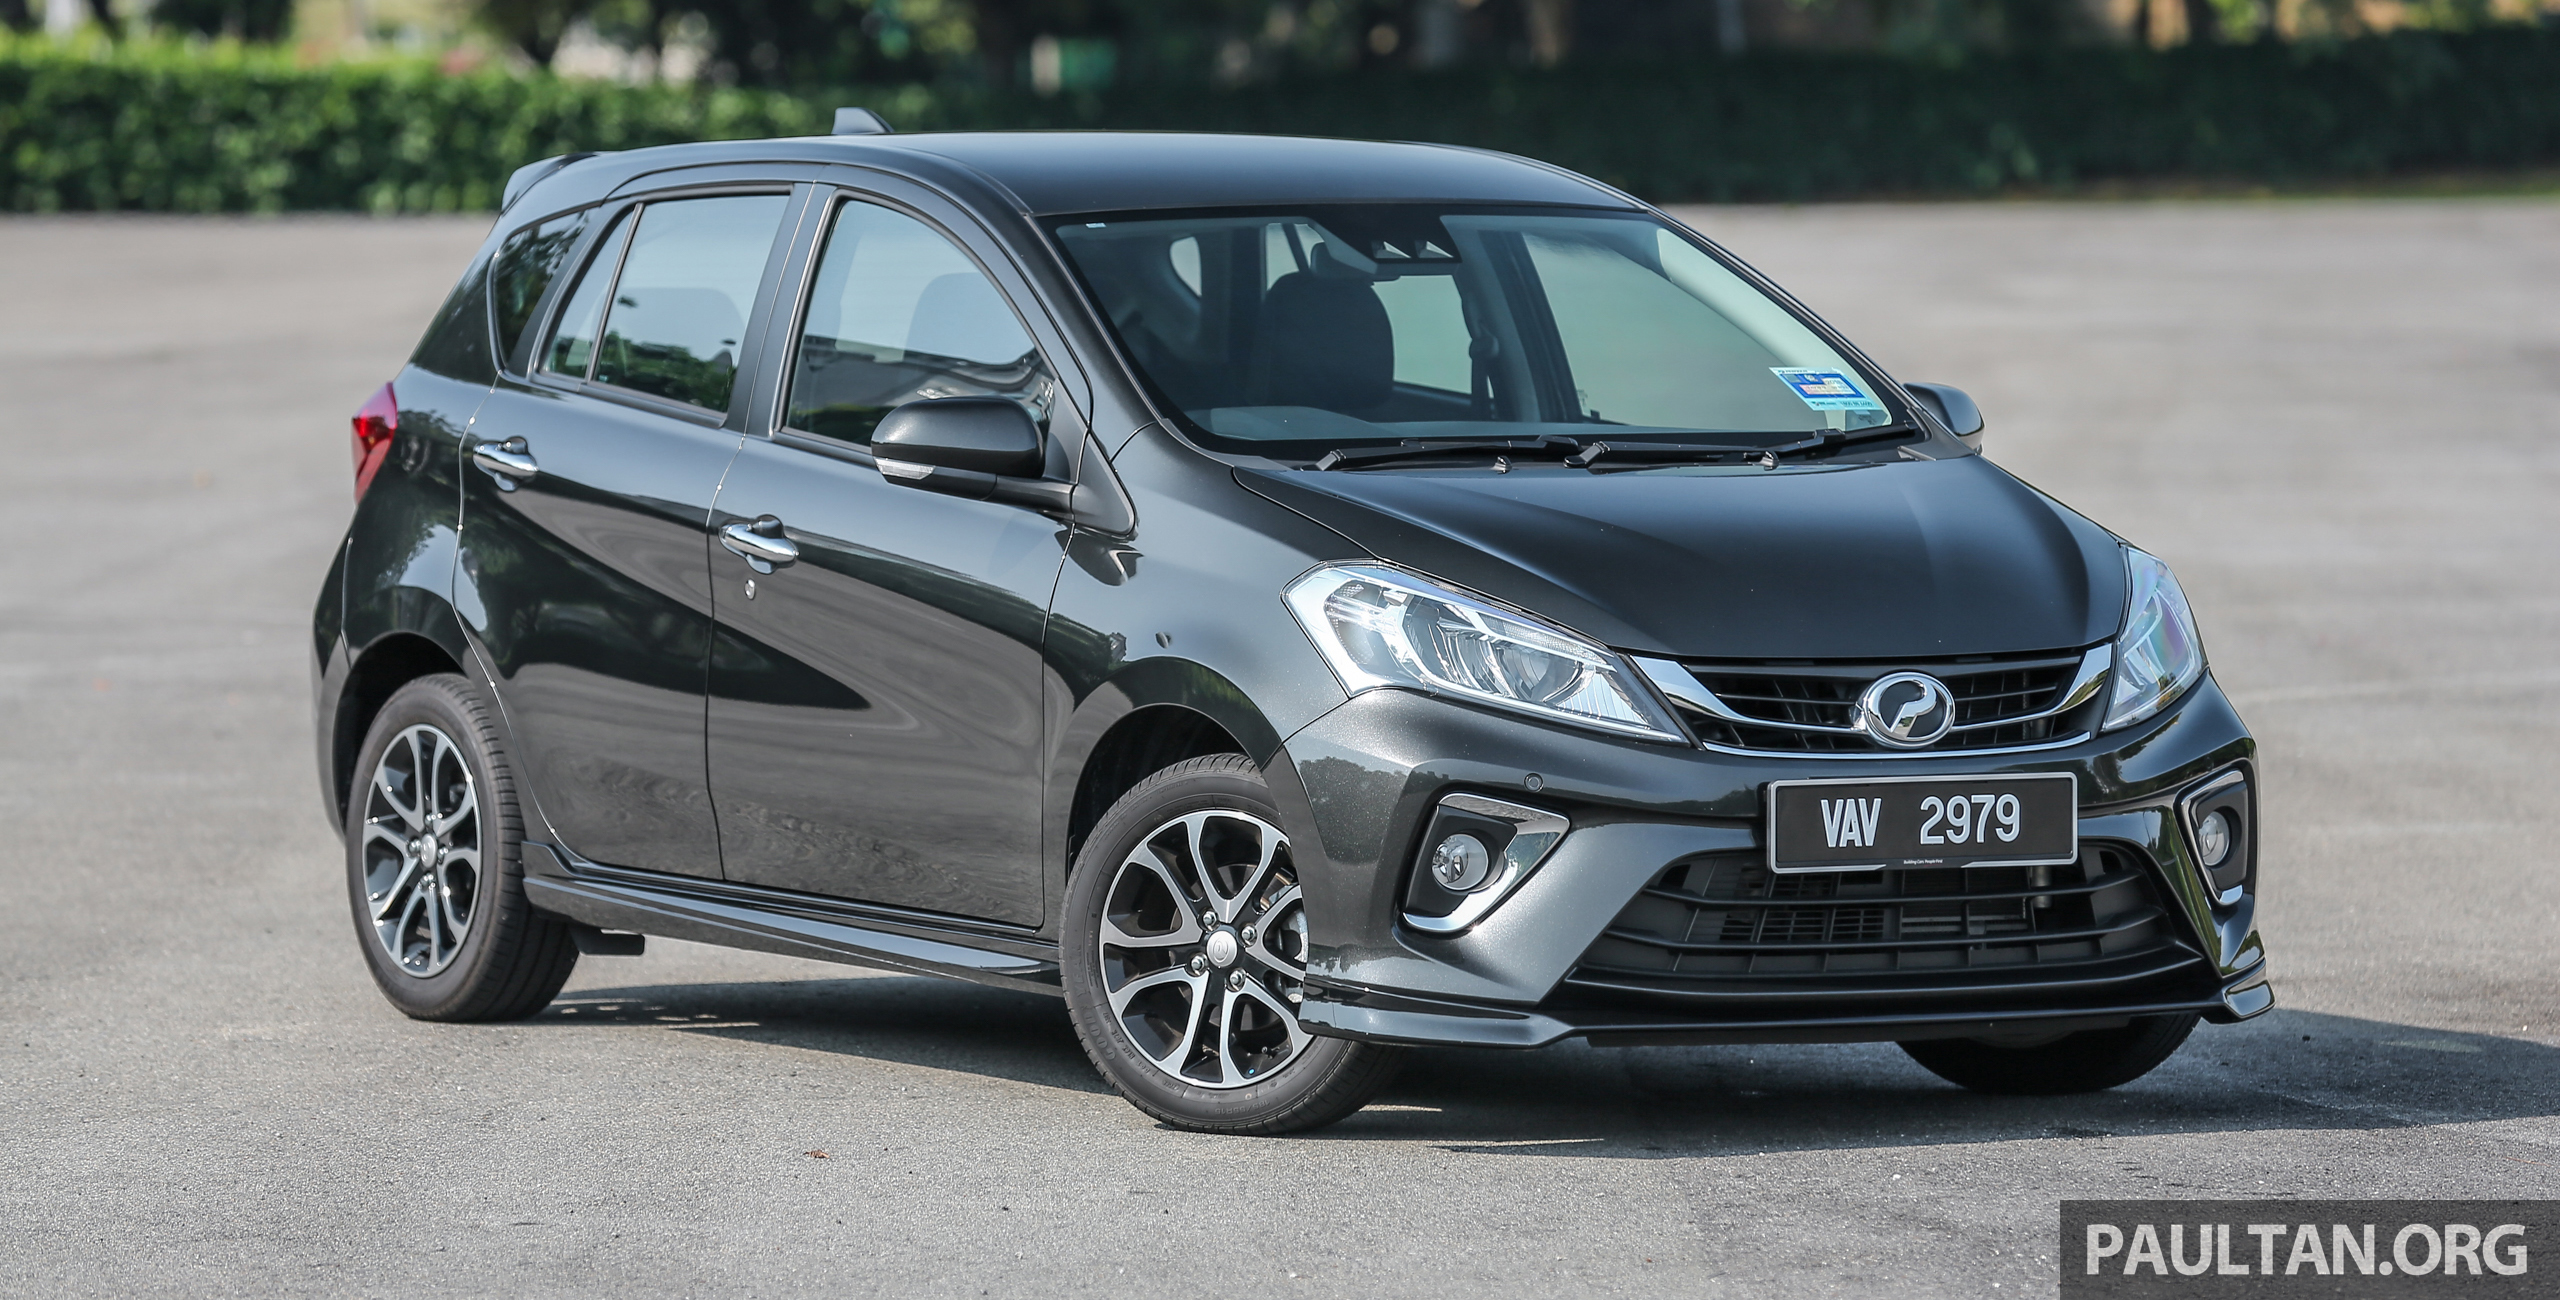 Perodua Myvi Over 100 000 Units Of Third Generation Model Delivered Since Launch 1 560 Units A Week Paultan Org